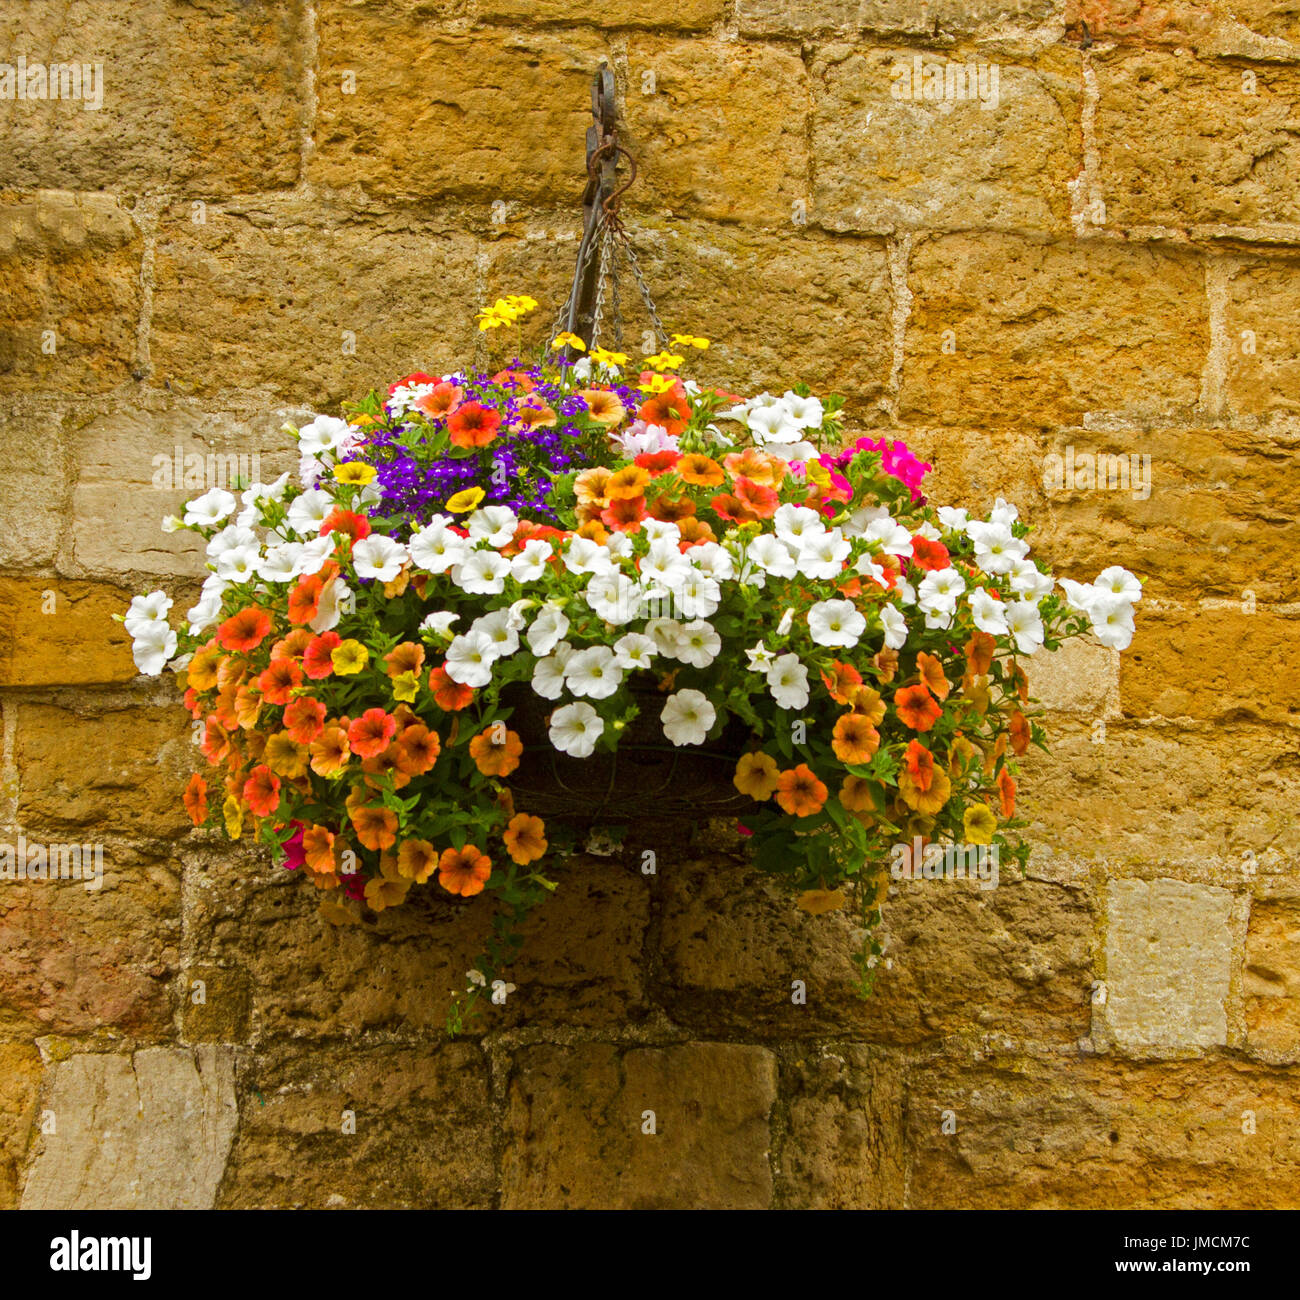 Mass of brightly coloured flowering plants, inc. orange and white calibrachoas and purple lobelia in hanging basket against golden brown stone wall Stock Photo